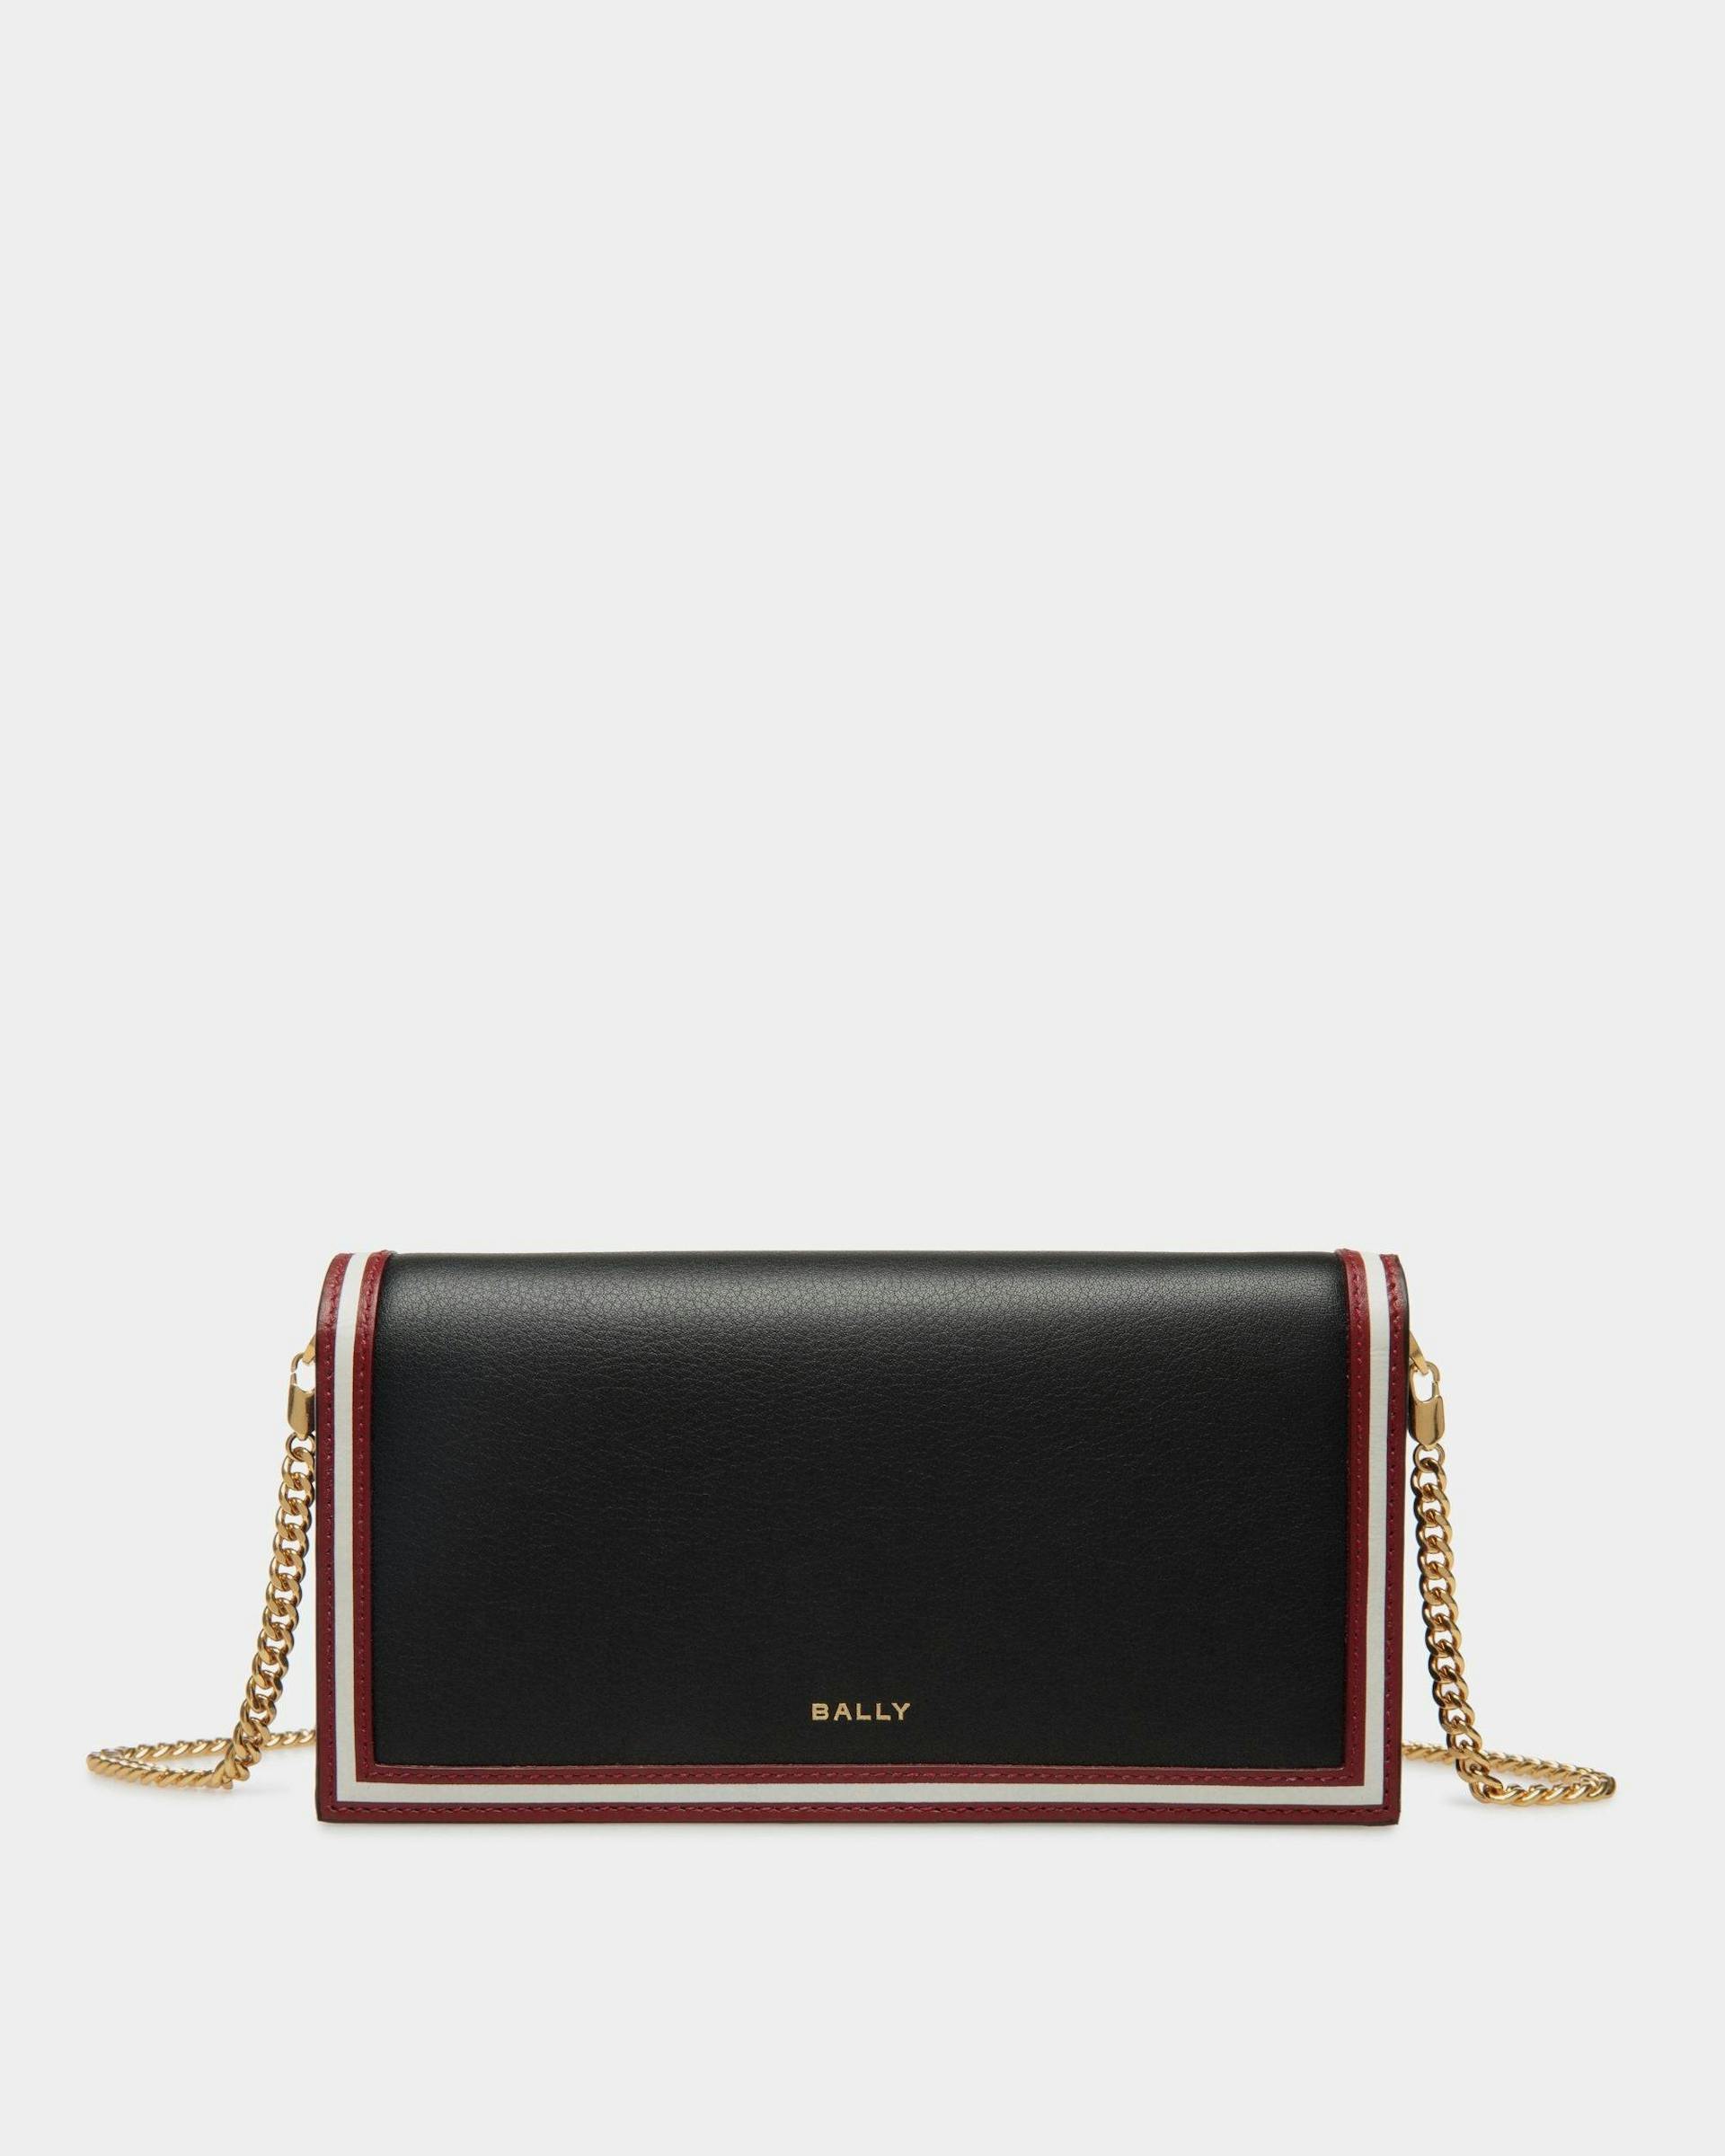 Women's Code Wallet on a Chain in Black Leather | Bally | Still Life Front